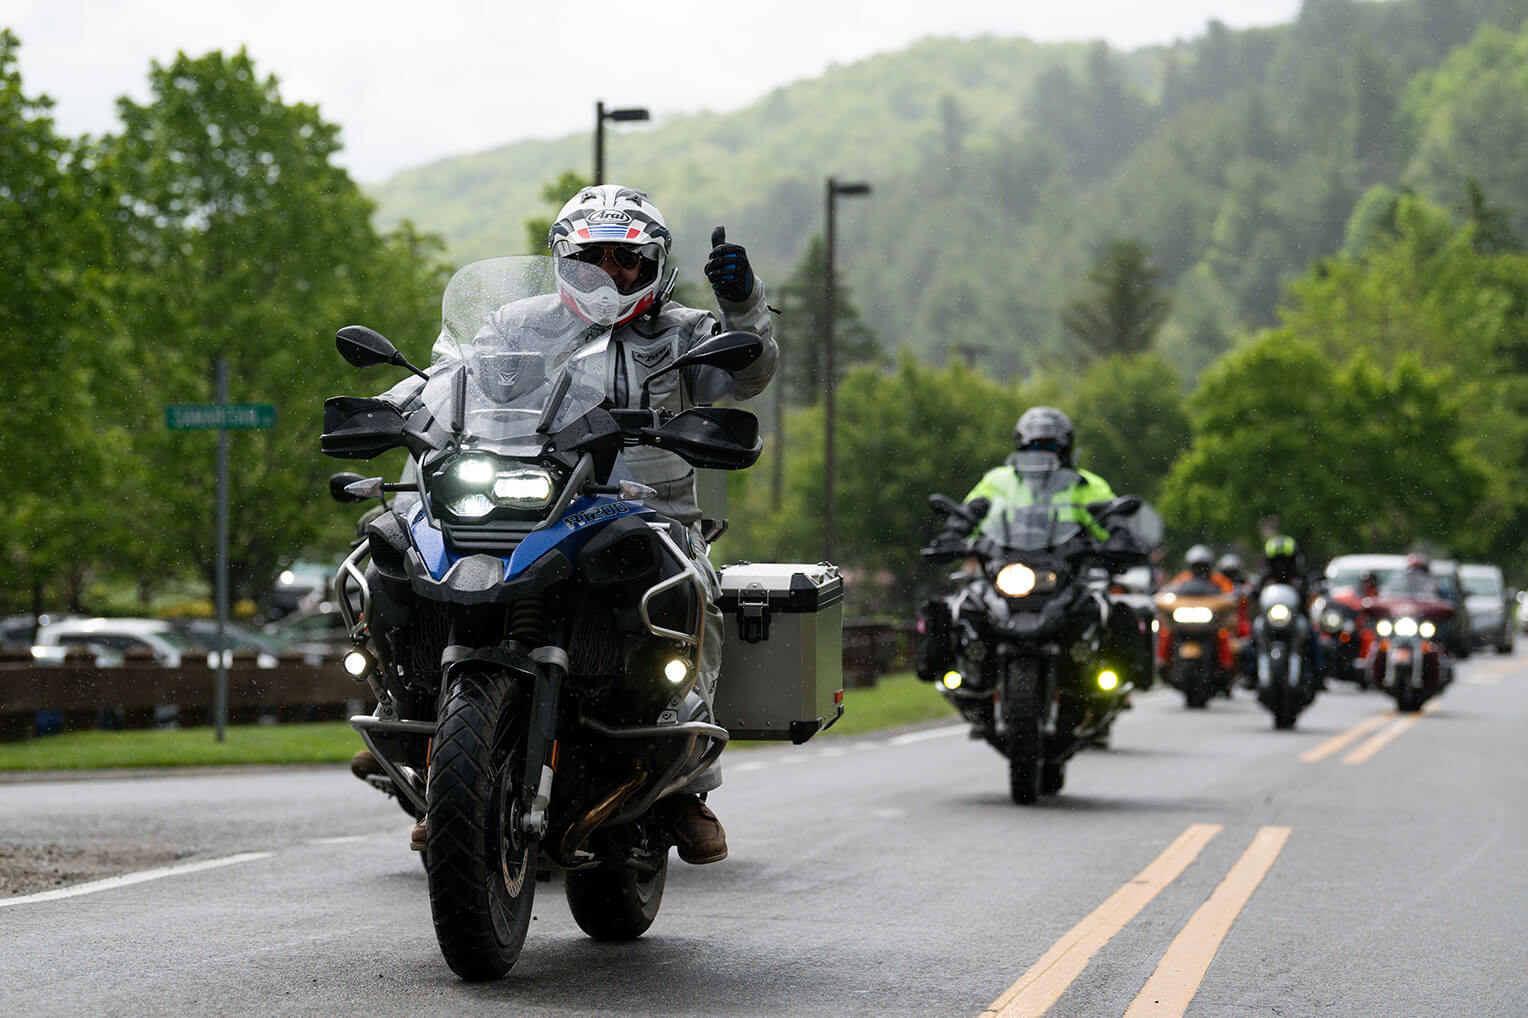 A rider gave a thumbs-up as the convoy left the International Headquarters for Samaritan's Purse in Boone, North Carolina.